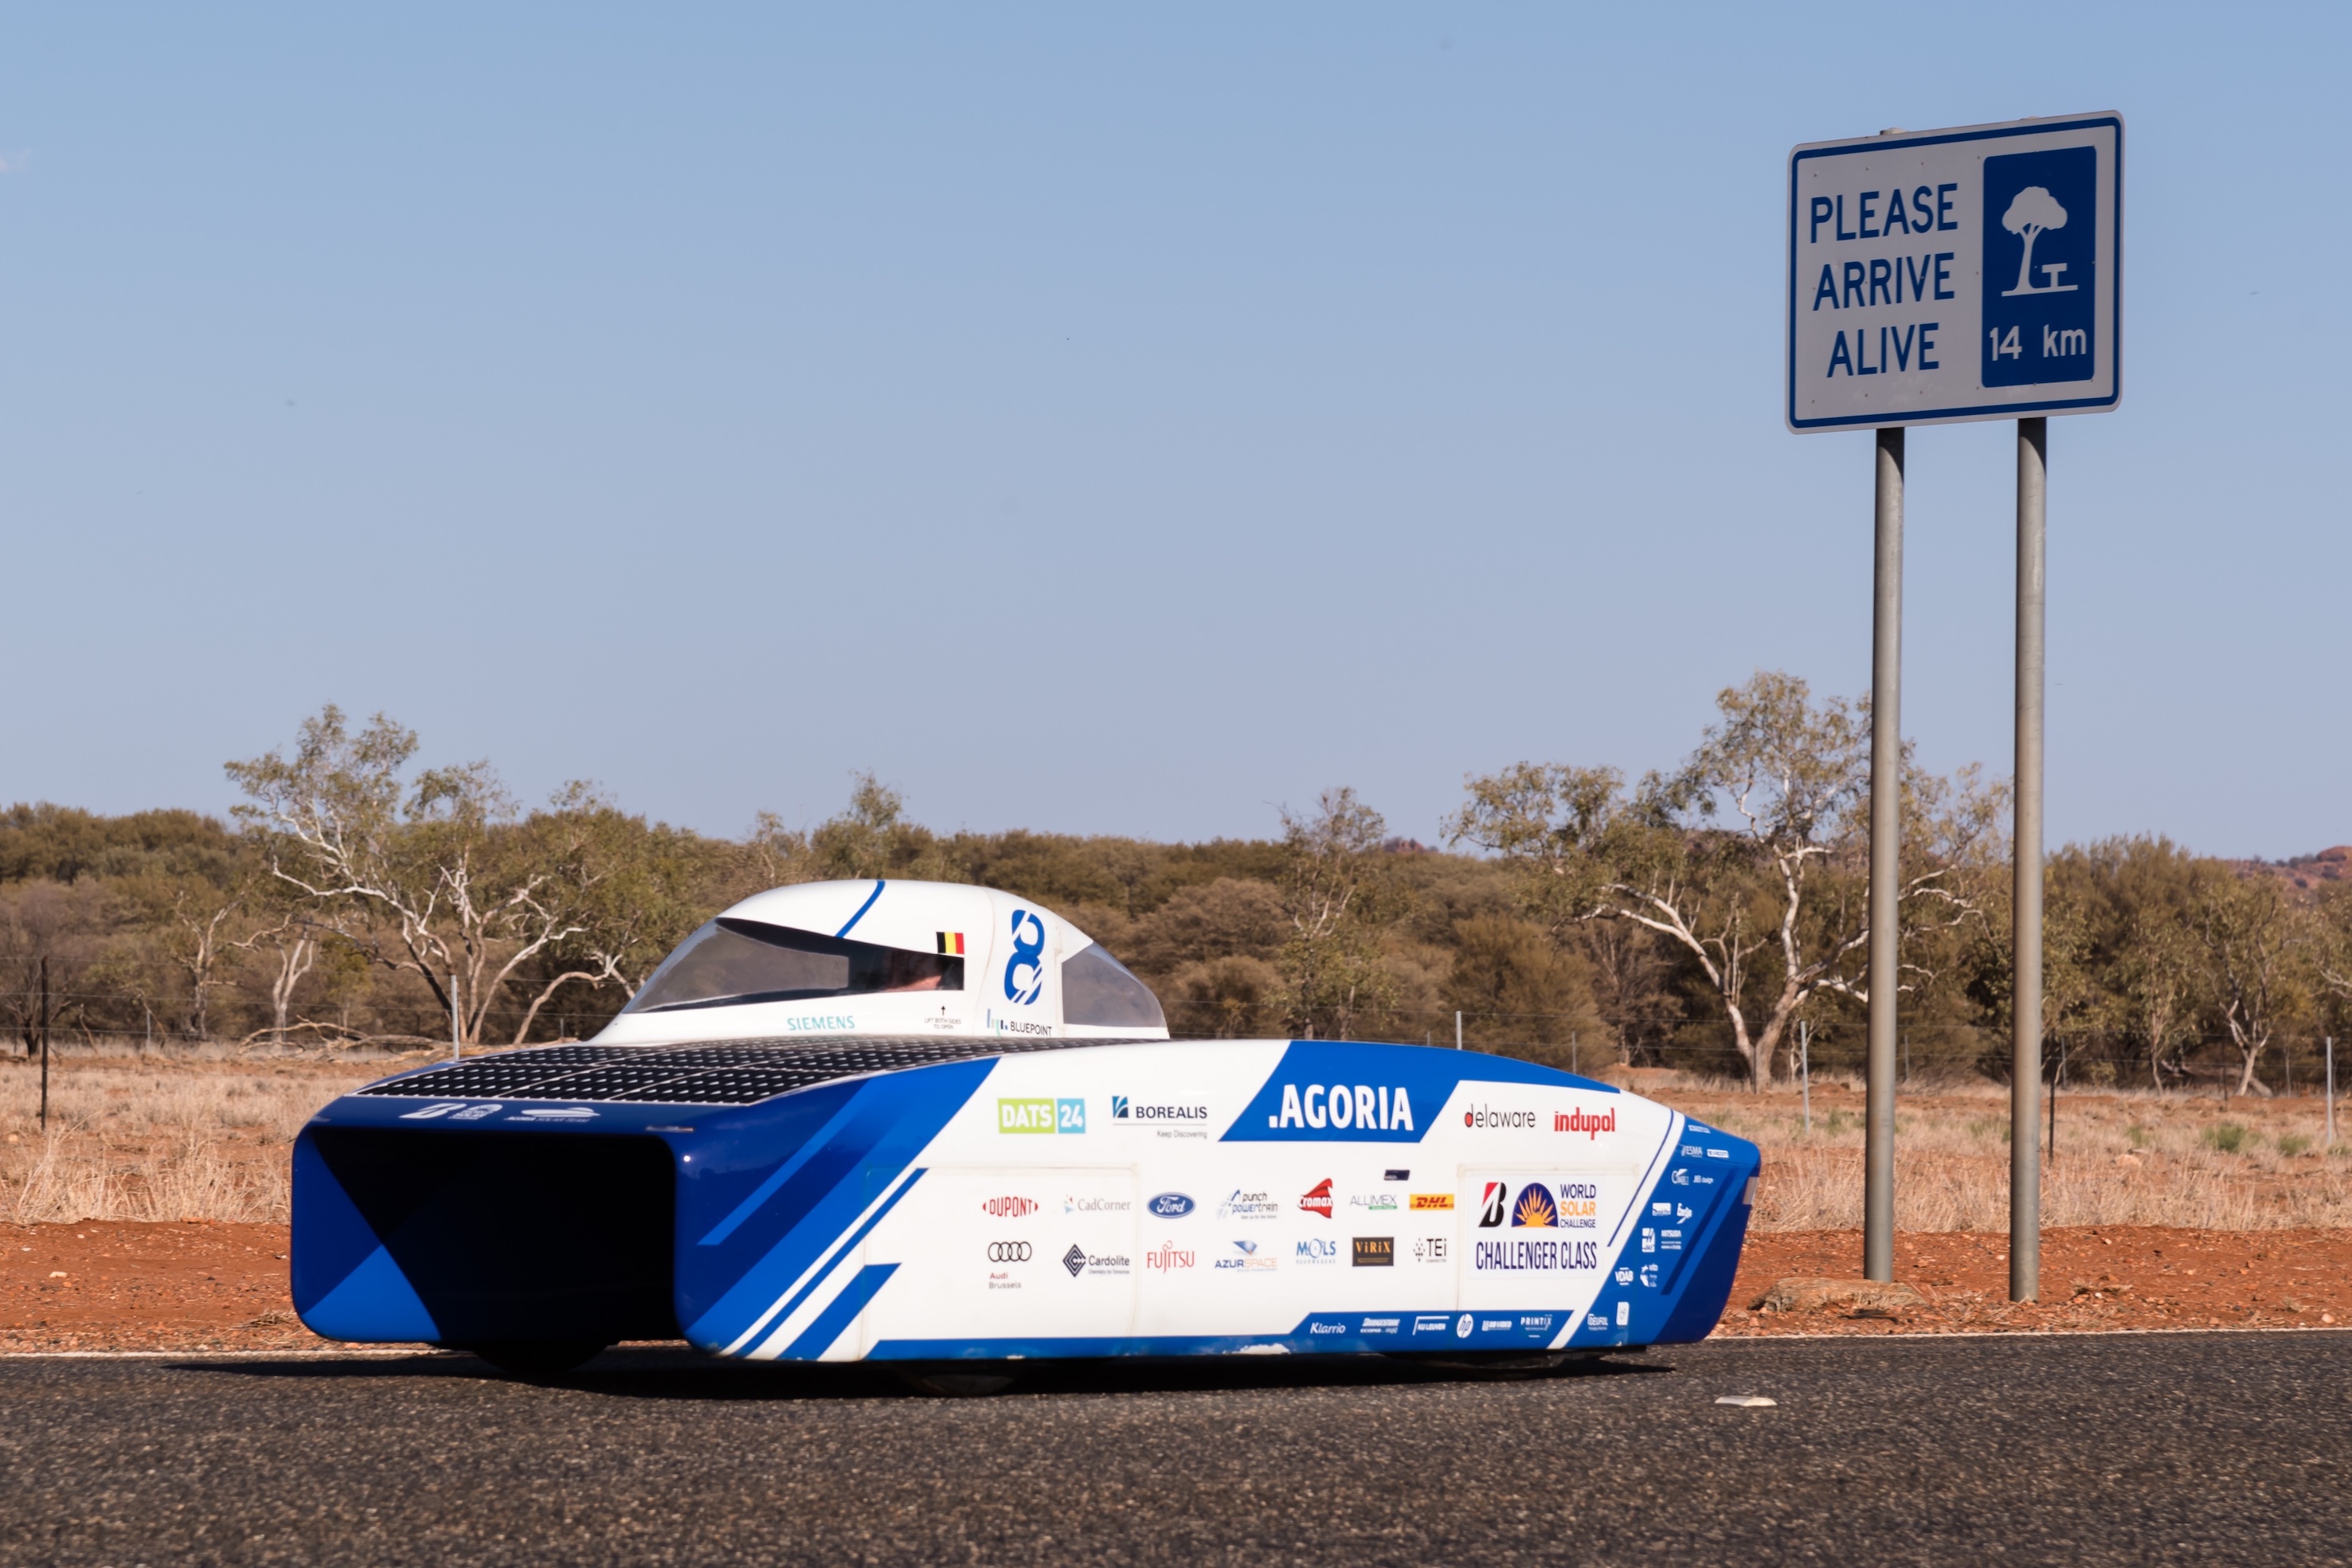 axalta-supports-stem-with-student-racing-agoria-solar-team